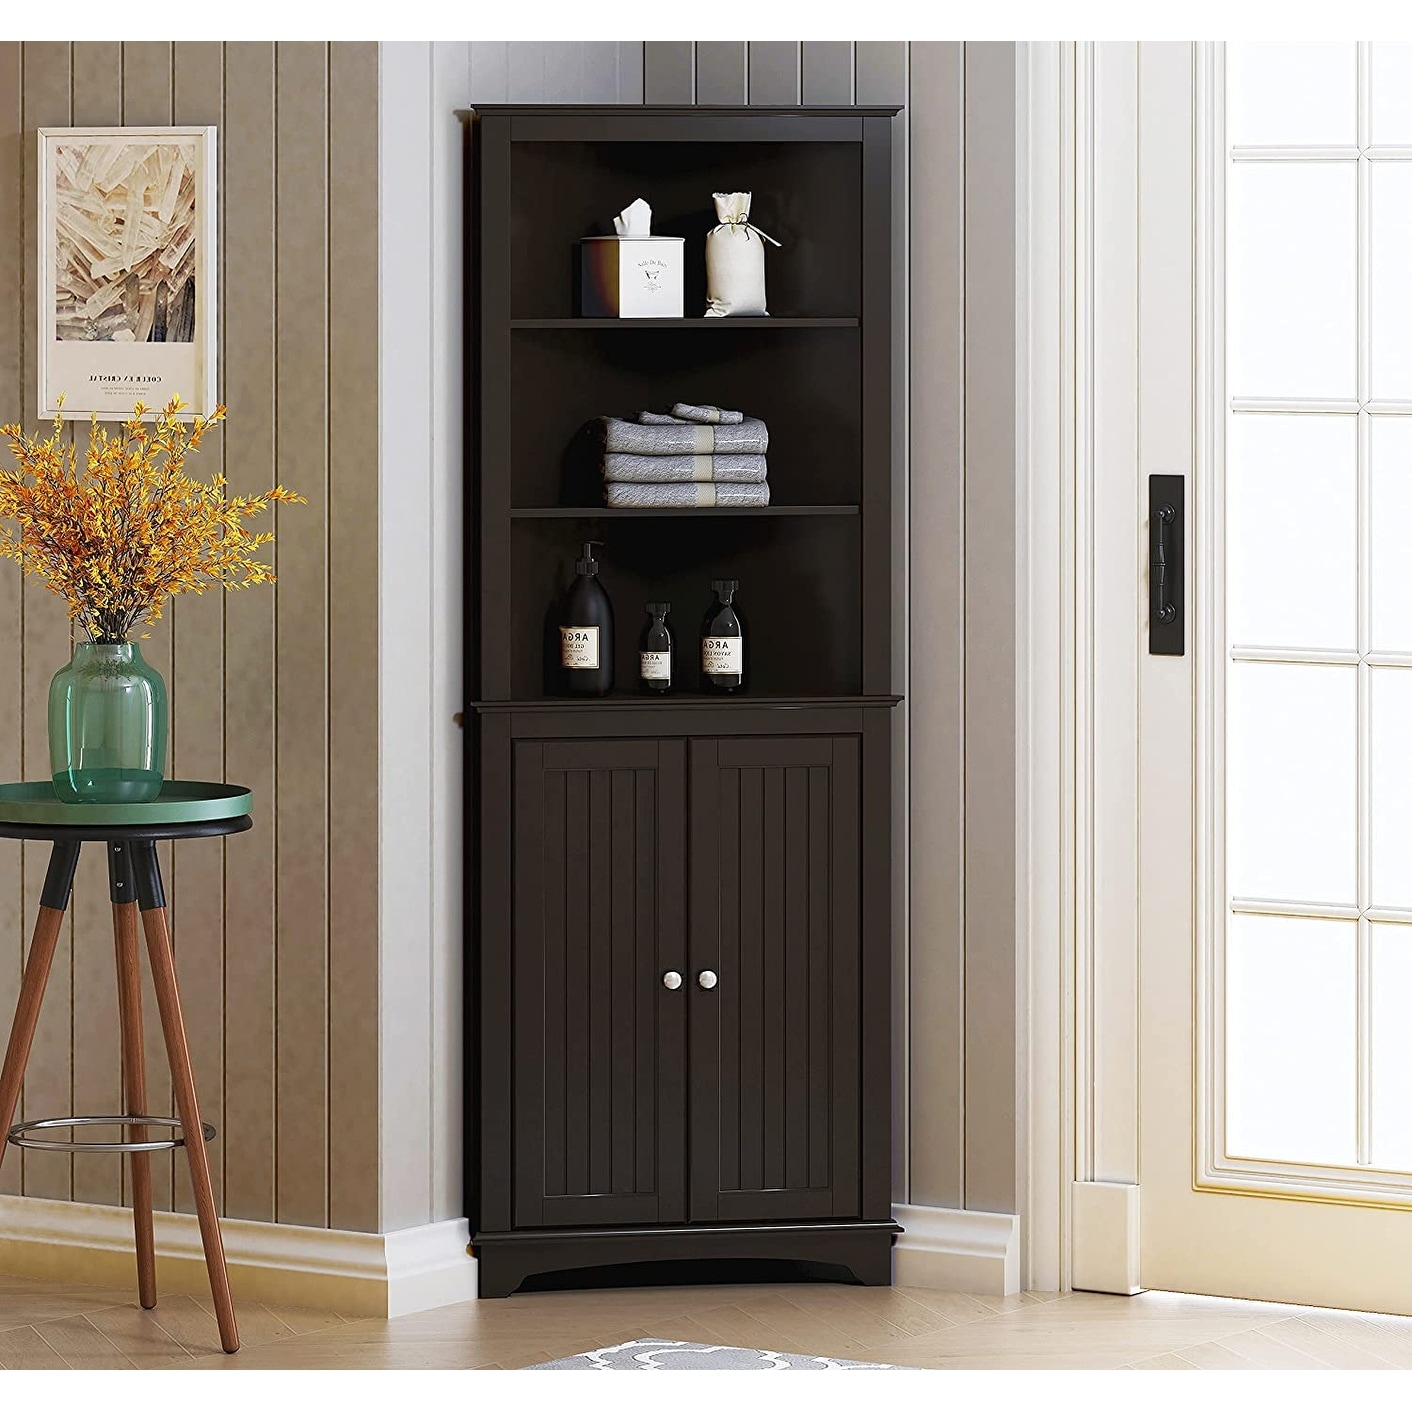 https://ak1.ostkcdn.com/images/products/is/images/direct/65bbf61e1a4621c7dd164dec6f0503263efb20f9/Spirich--Bathroom-Storage%2CTall-Corner-Cabinet-with-2-Doors-and-3-Tier-Shelves%2CWhite.jpg